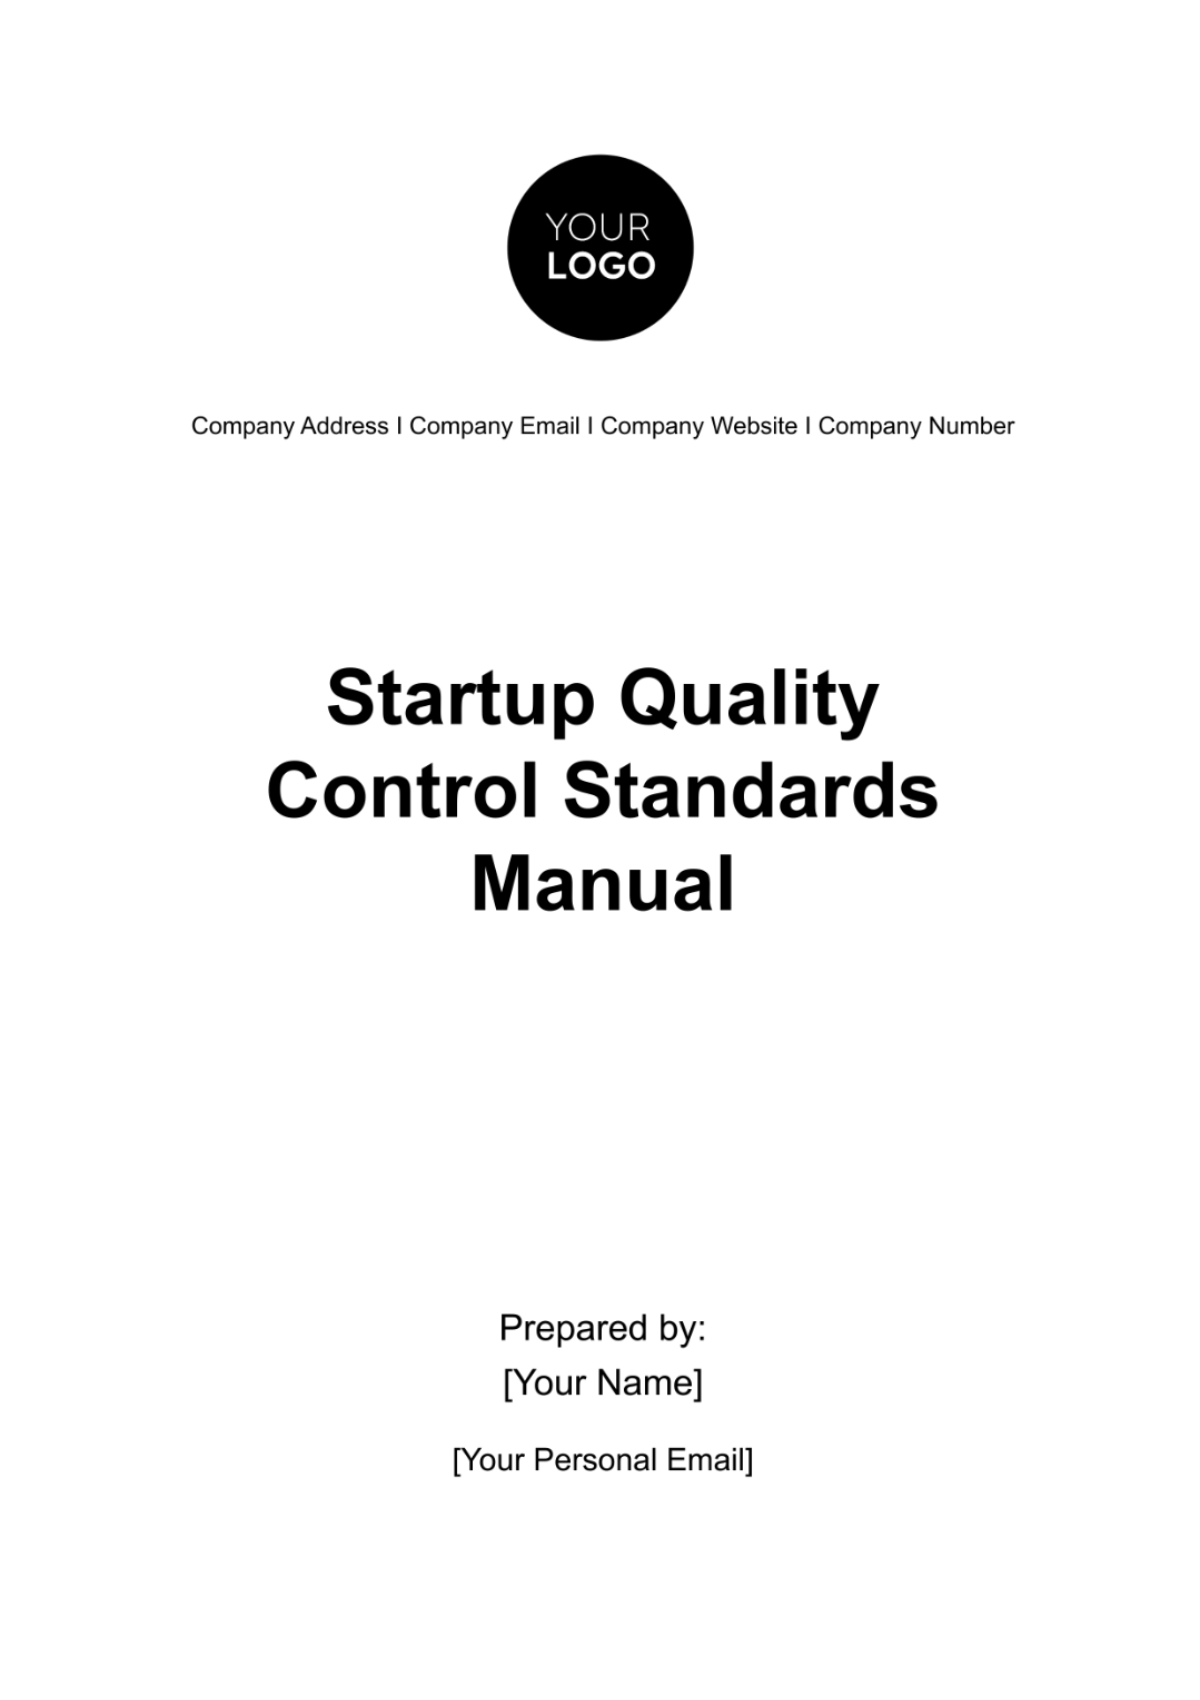 Startup Quality Control Standards Manual Template